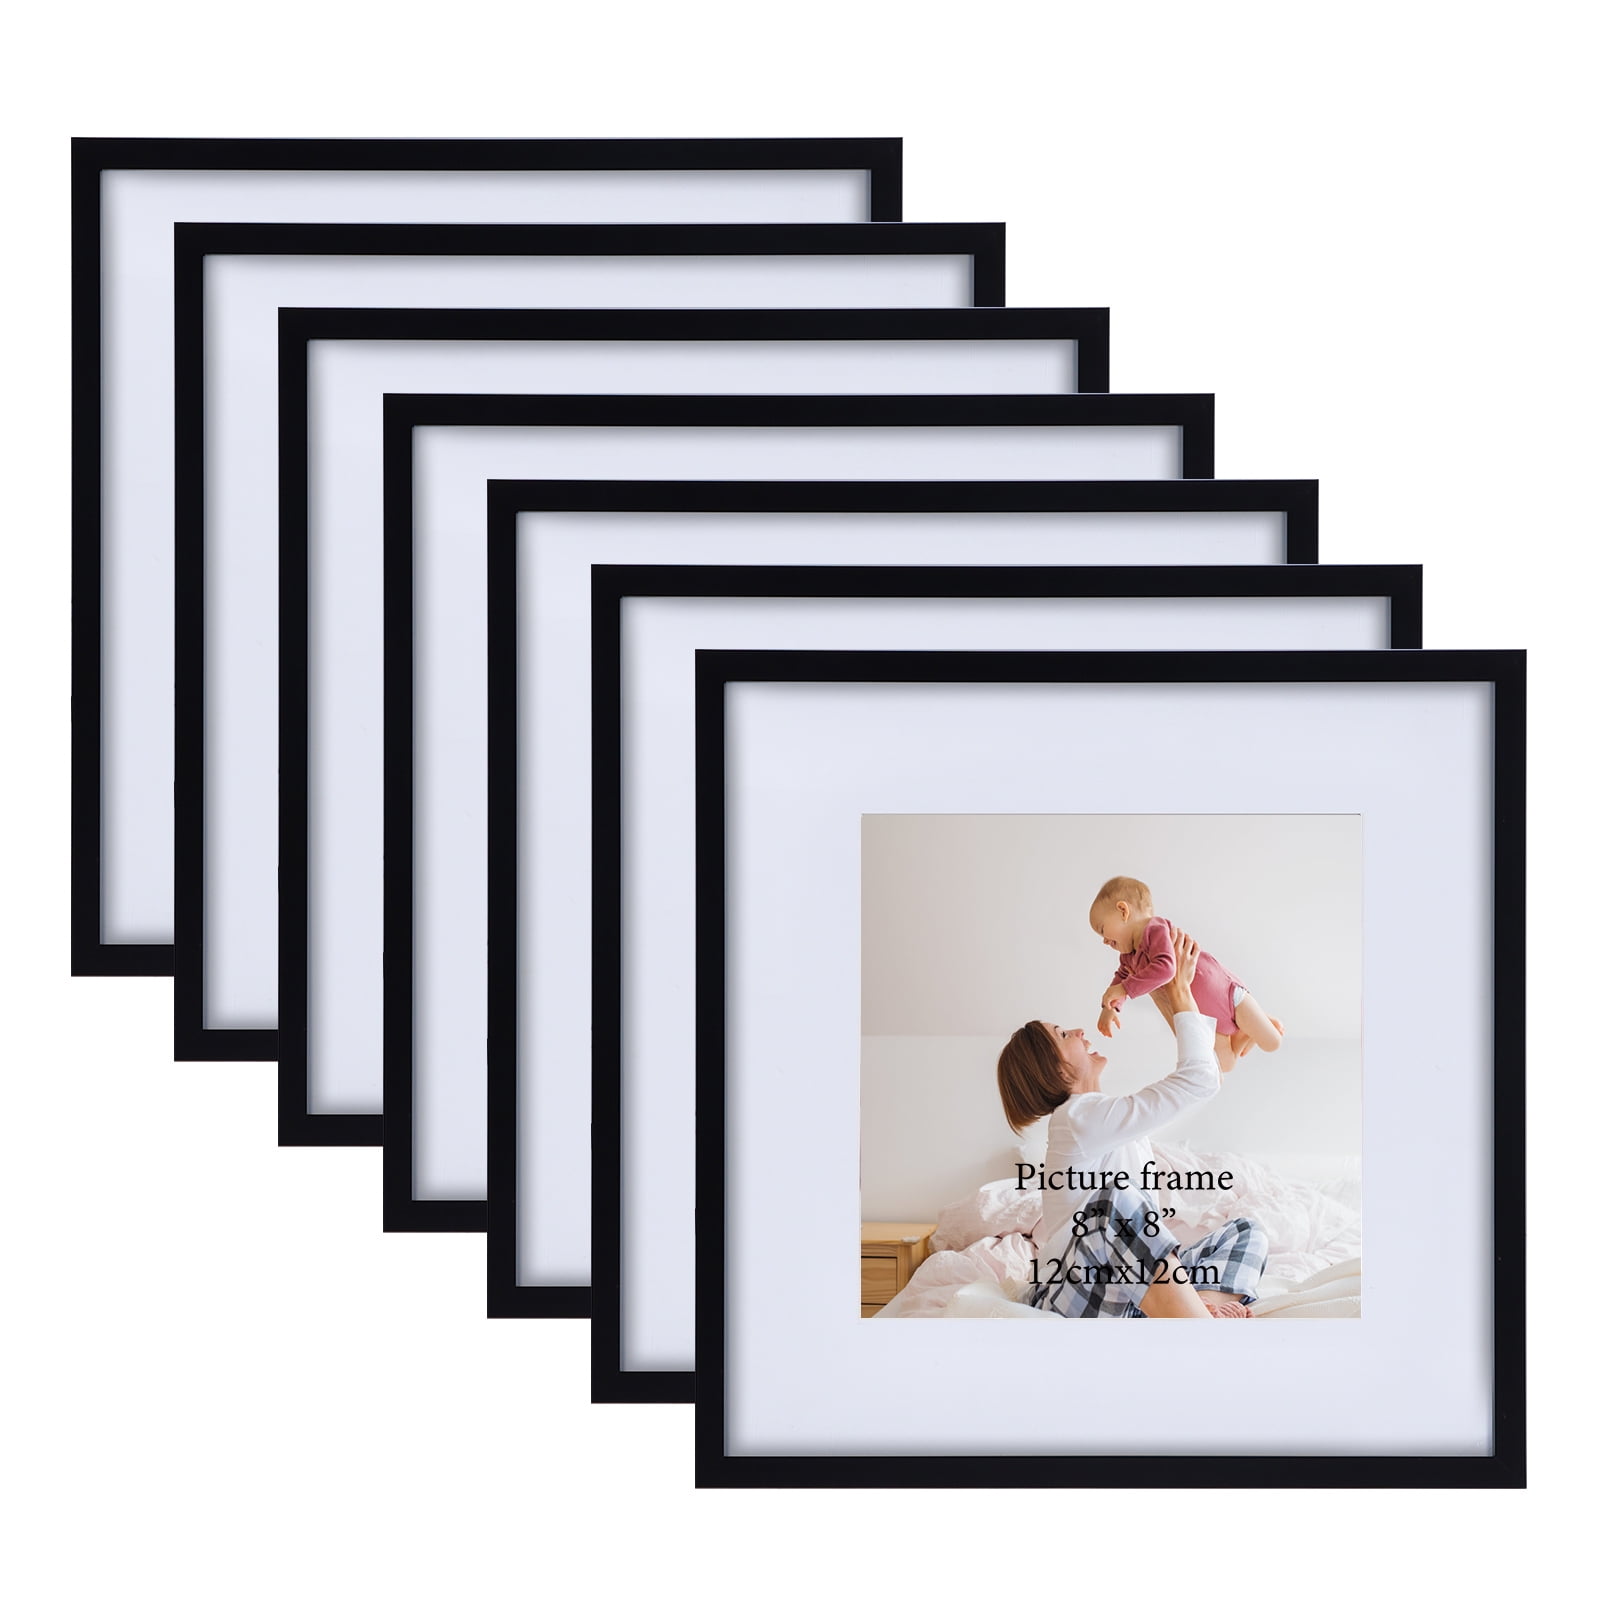 HAUS AND HUES Solid Oak 8x8 Picture Frame Matted to 4x4 - 8 x 8 Picture  Frame, 8x8 Frame with Mat, Square Picture Frames, 8 x 8 Frame Square